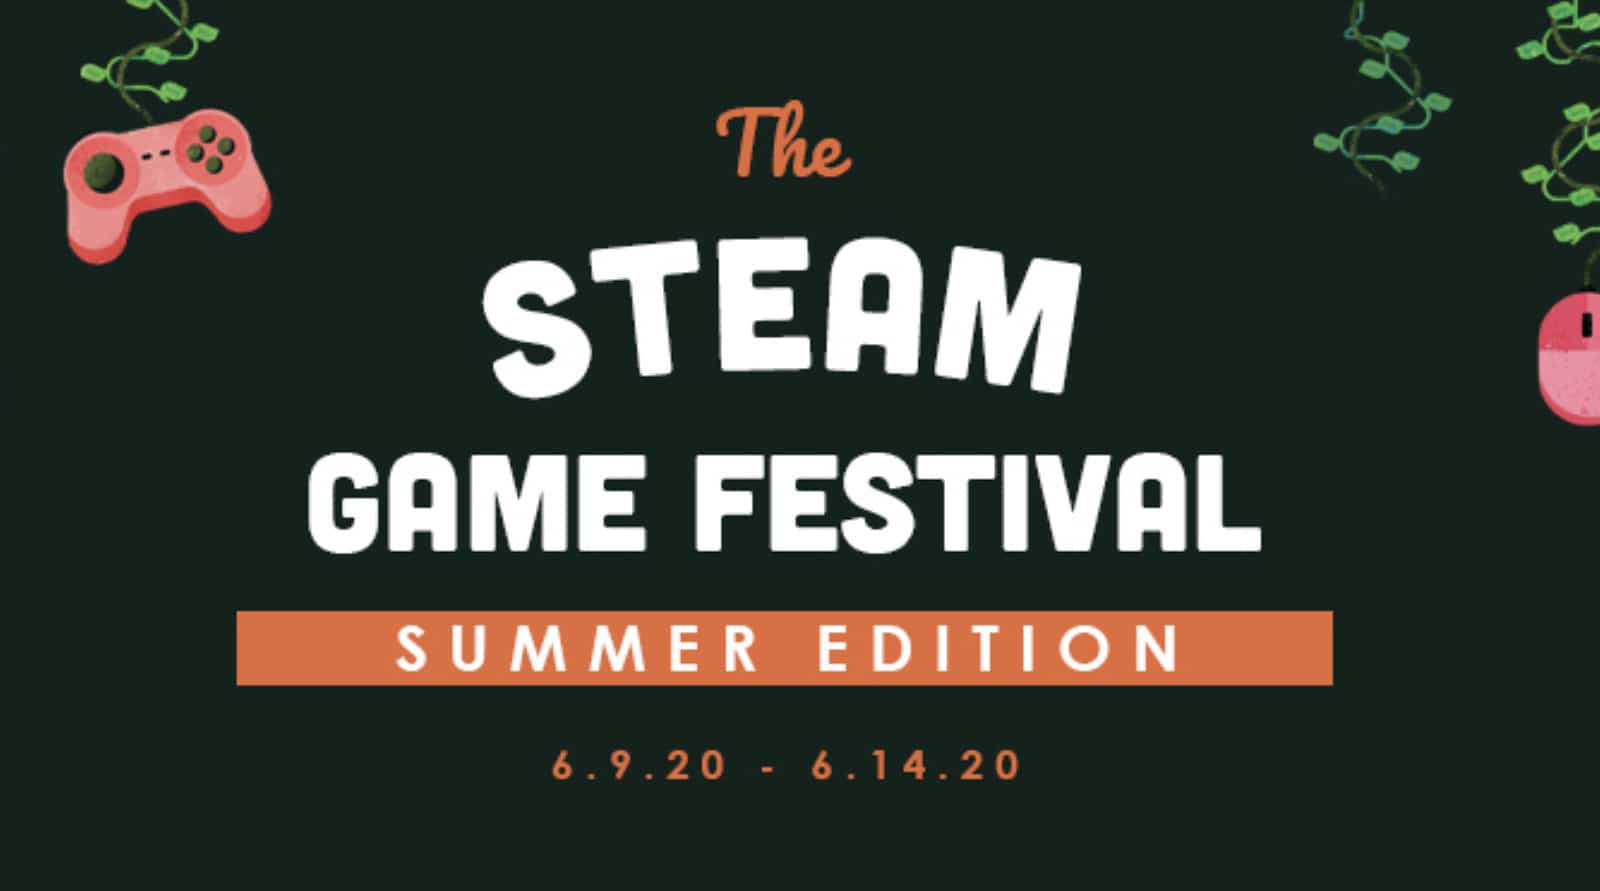 Over 900 Free Demos Available During The Steam Game Festival